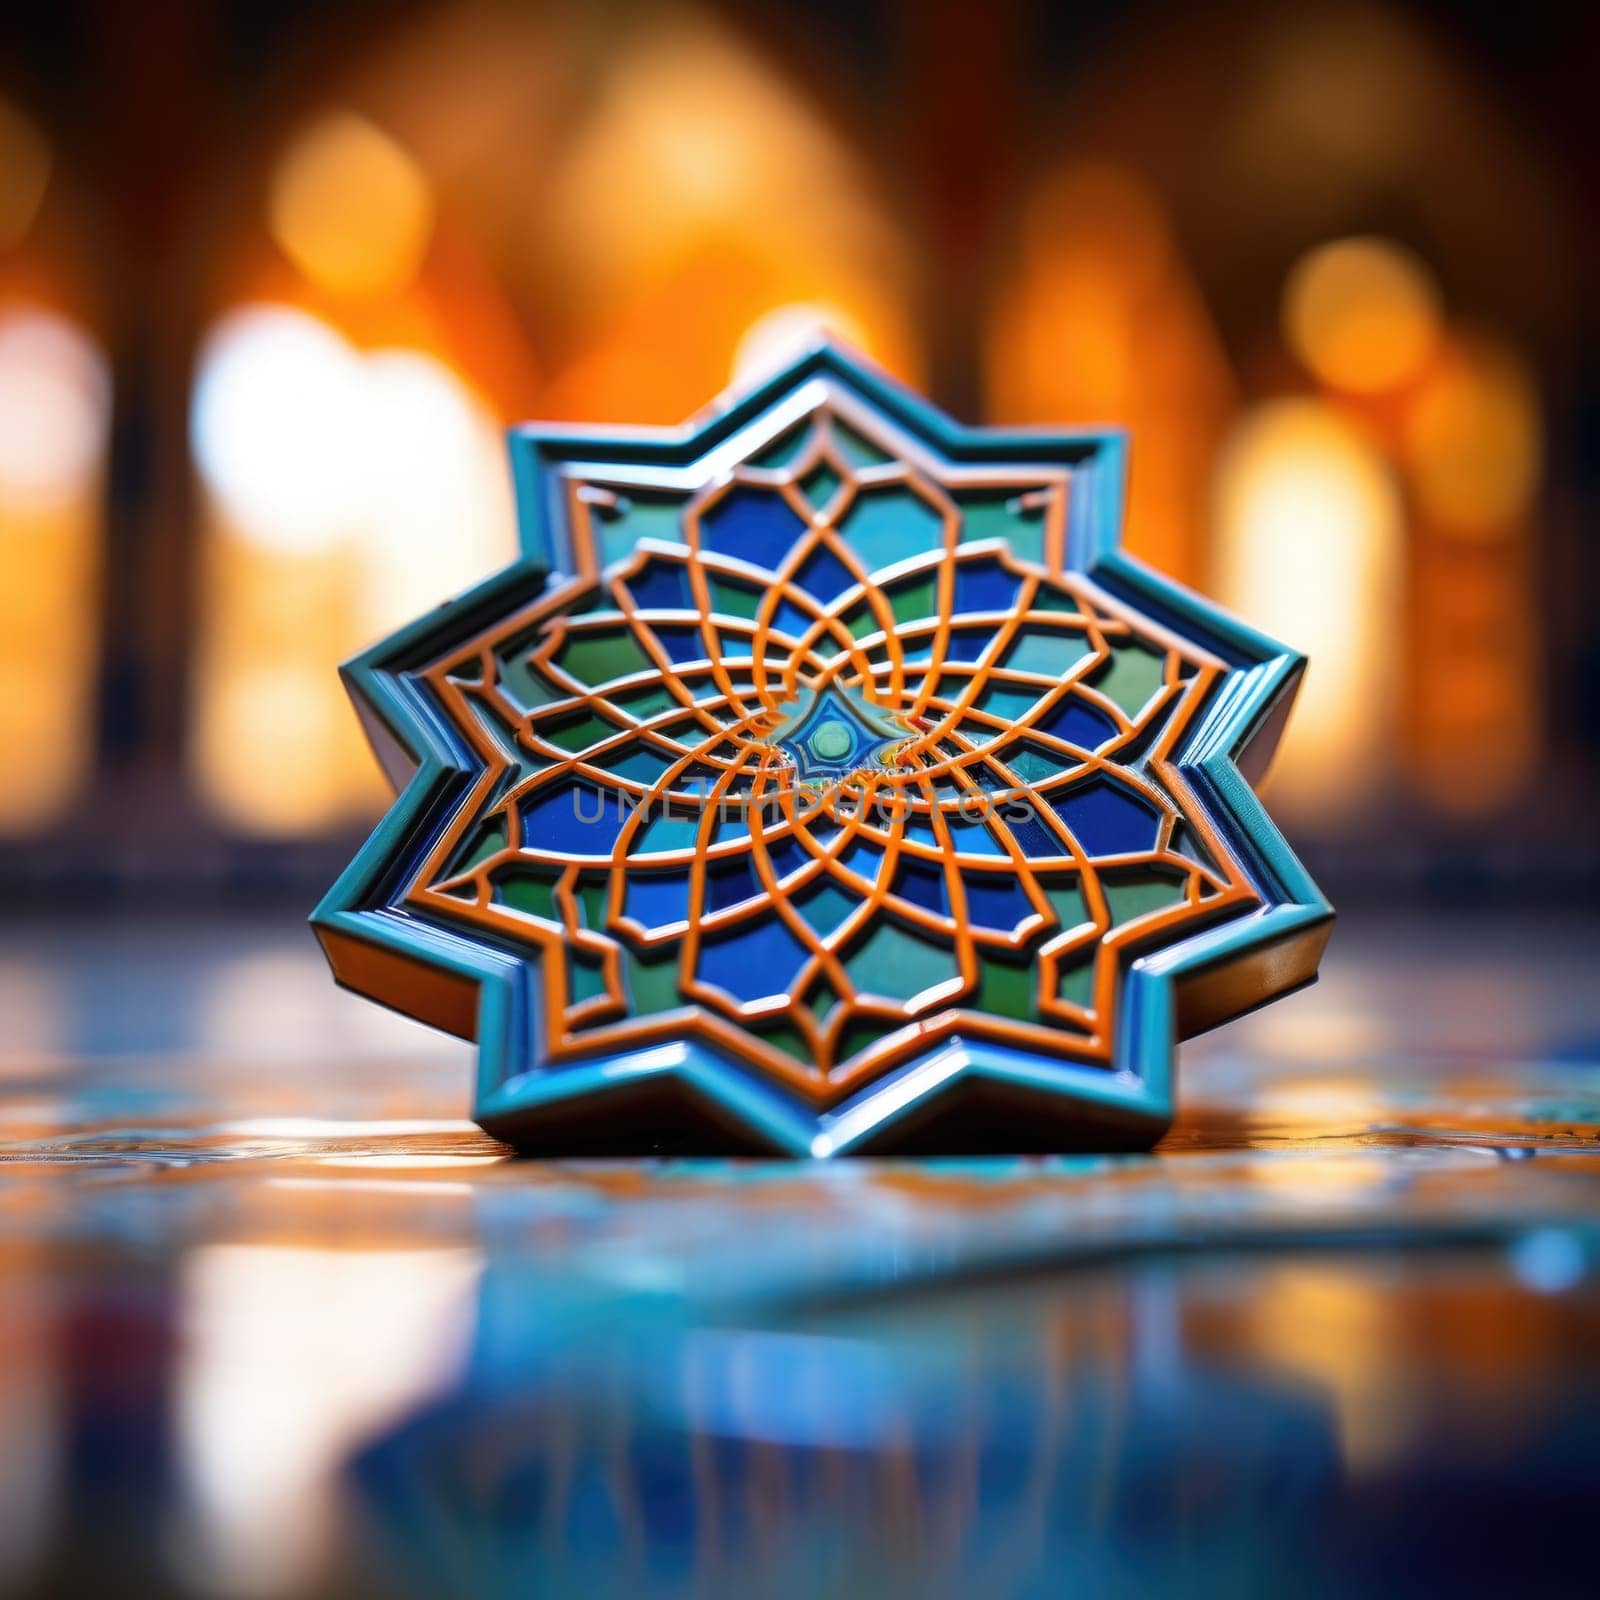 A colorful Moroccan star shaped object on a table, AI by starush